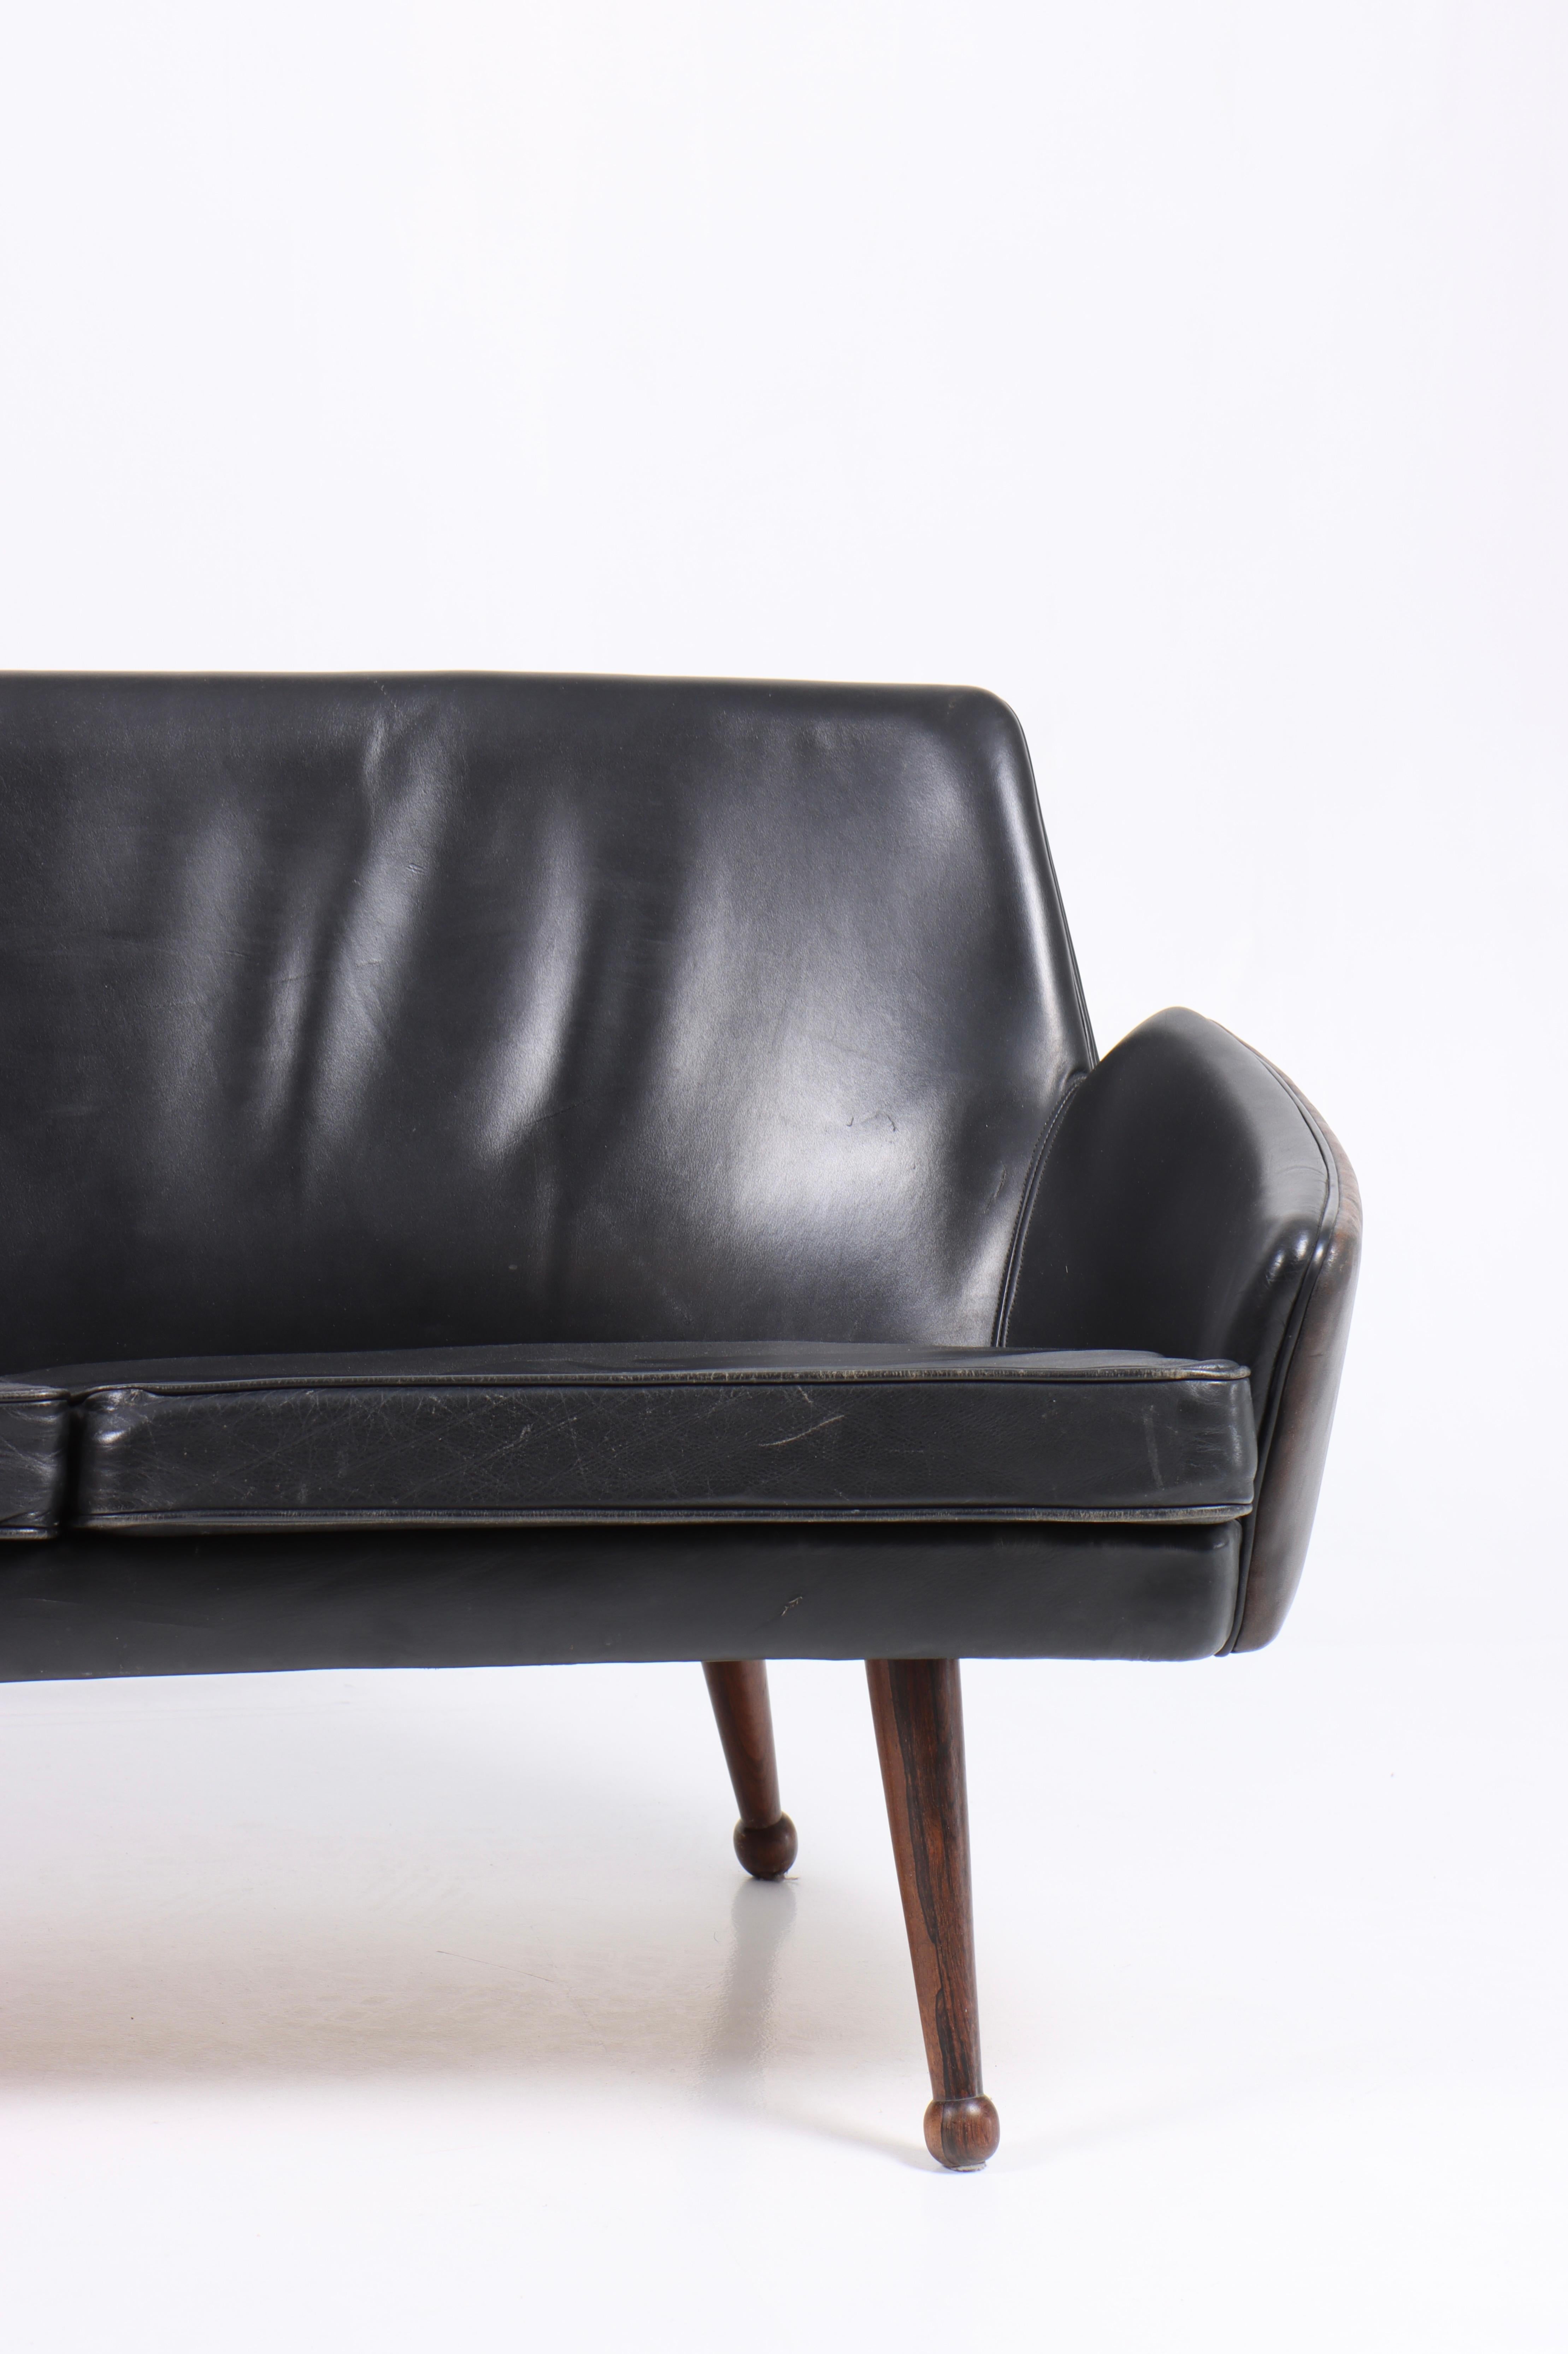 Scandinavian Modern Midcentury Sofa in Patinated Leather, Danish Design 1950s For Sale